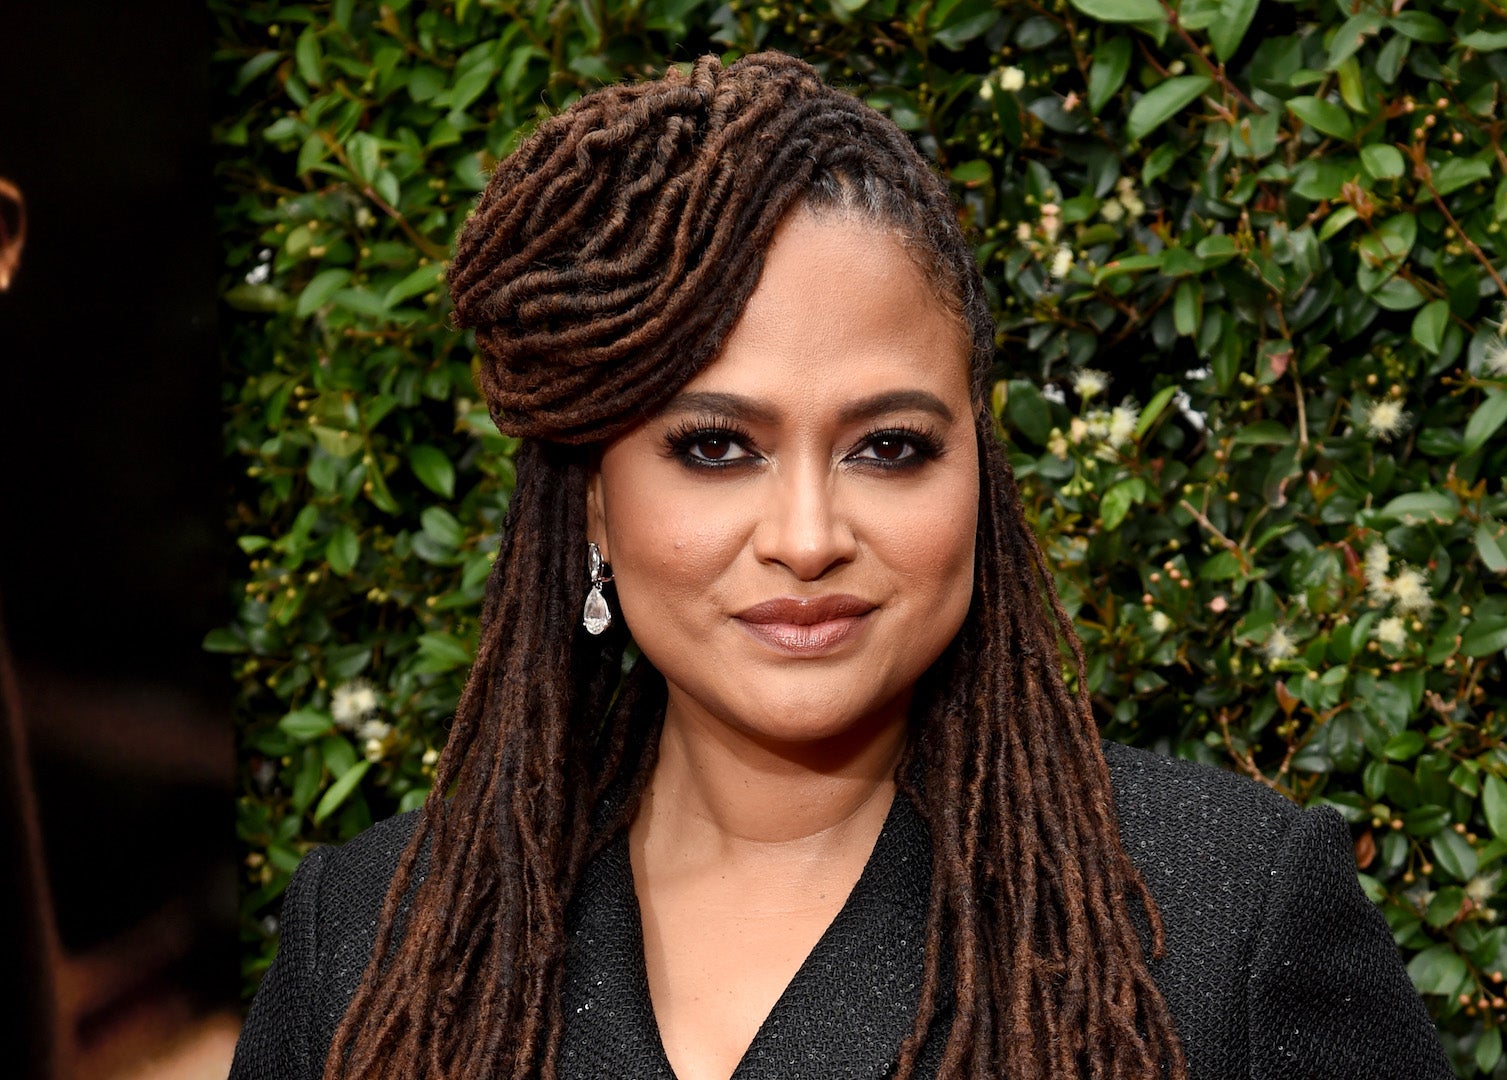 Ava DuVernay Is Not Surprised By Trump's Recent Comments On Central Park Five